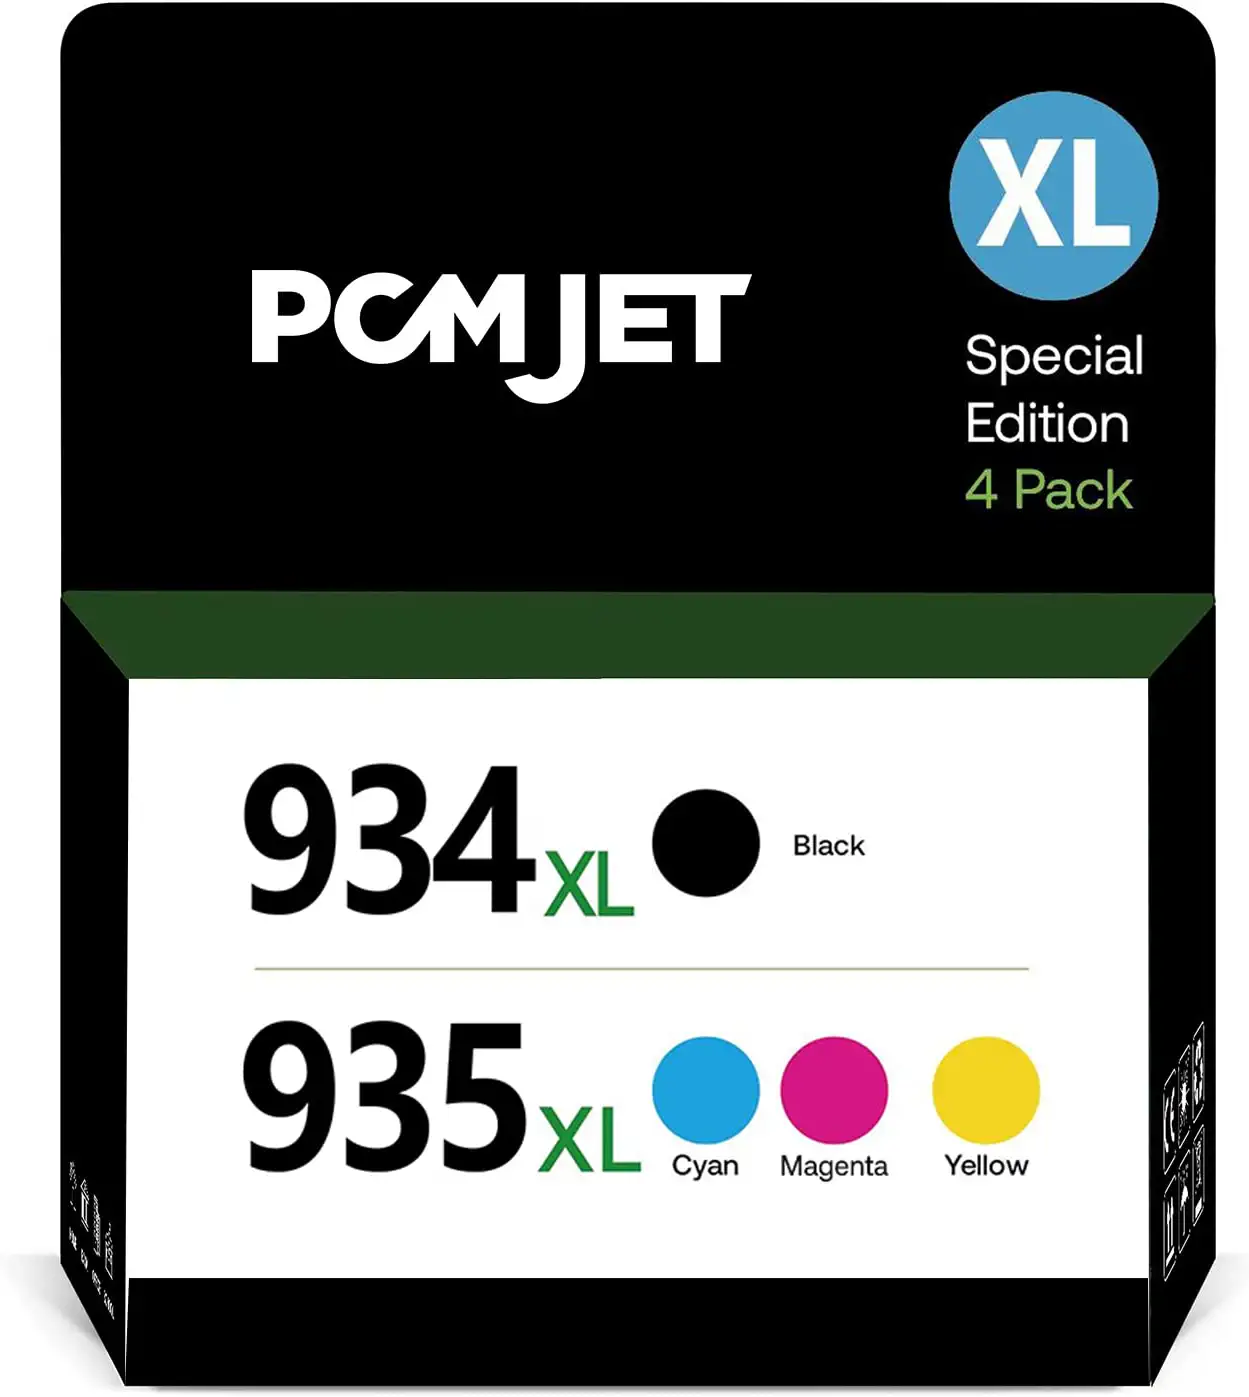 Photo 1 of 934XL 935 Ink Cartridges High Yield Combo Pack Compatible Replacement for Officejet 6830 6230 6815 6812 6835 6820 Printer (2 Black, 2 Cyan, 2 Yellow, 2 Magenta, 8 Packs)
